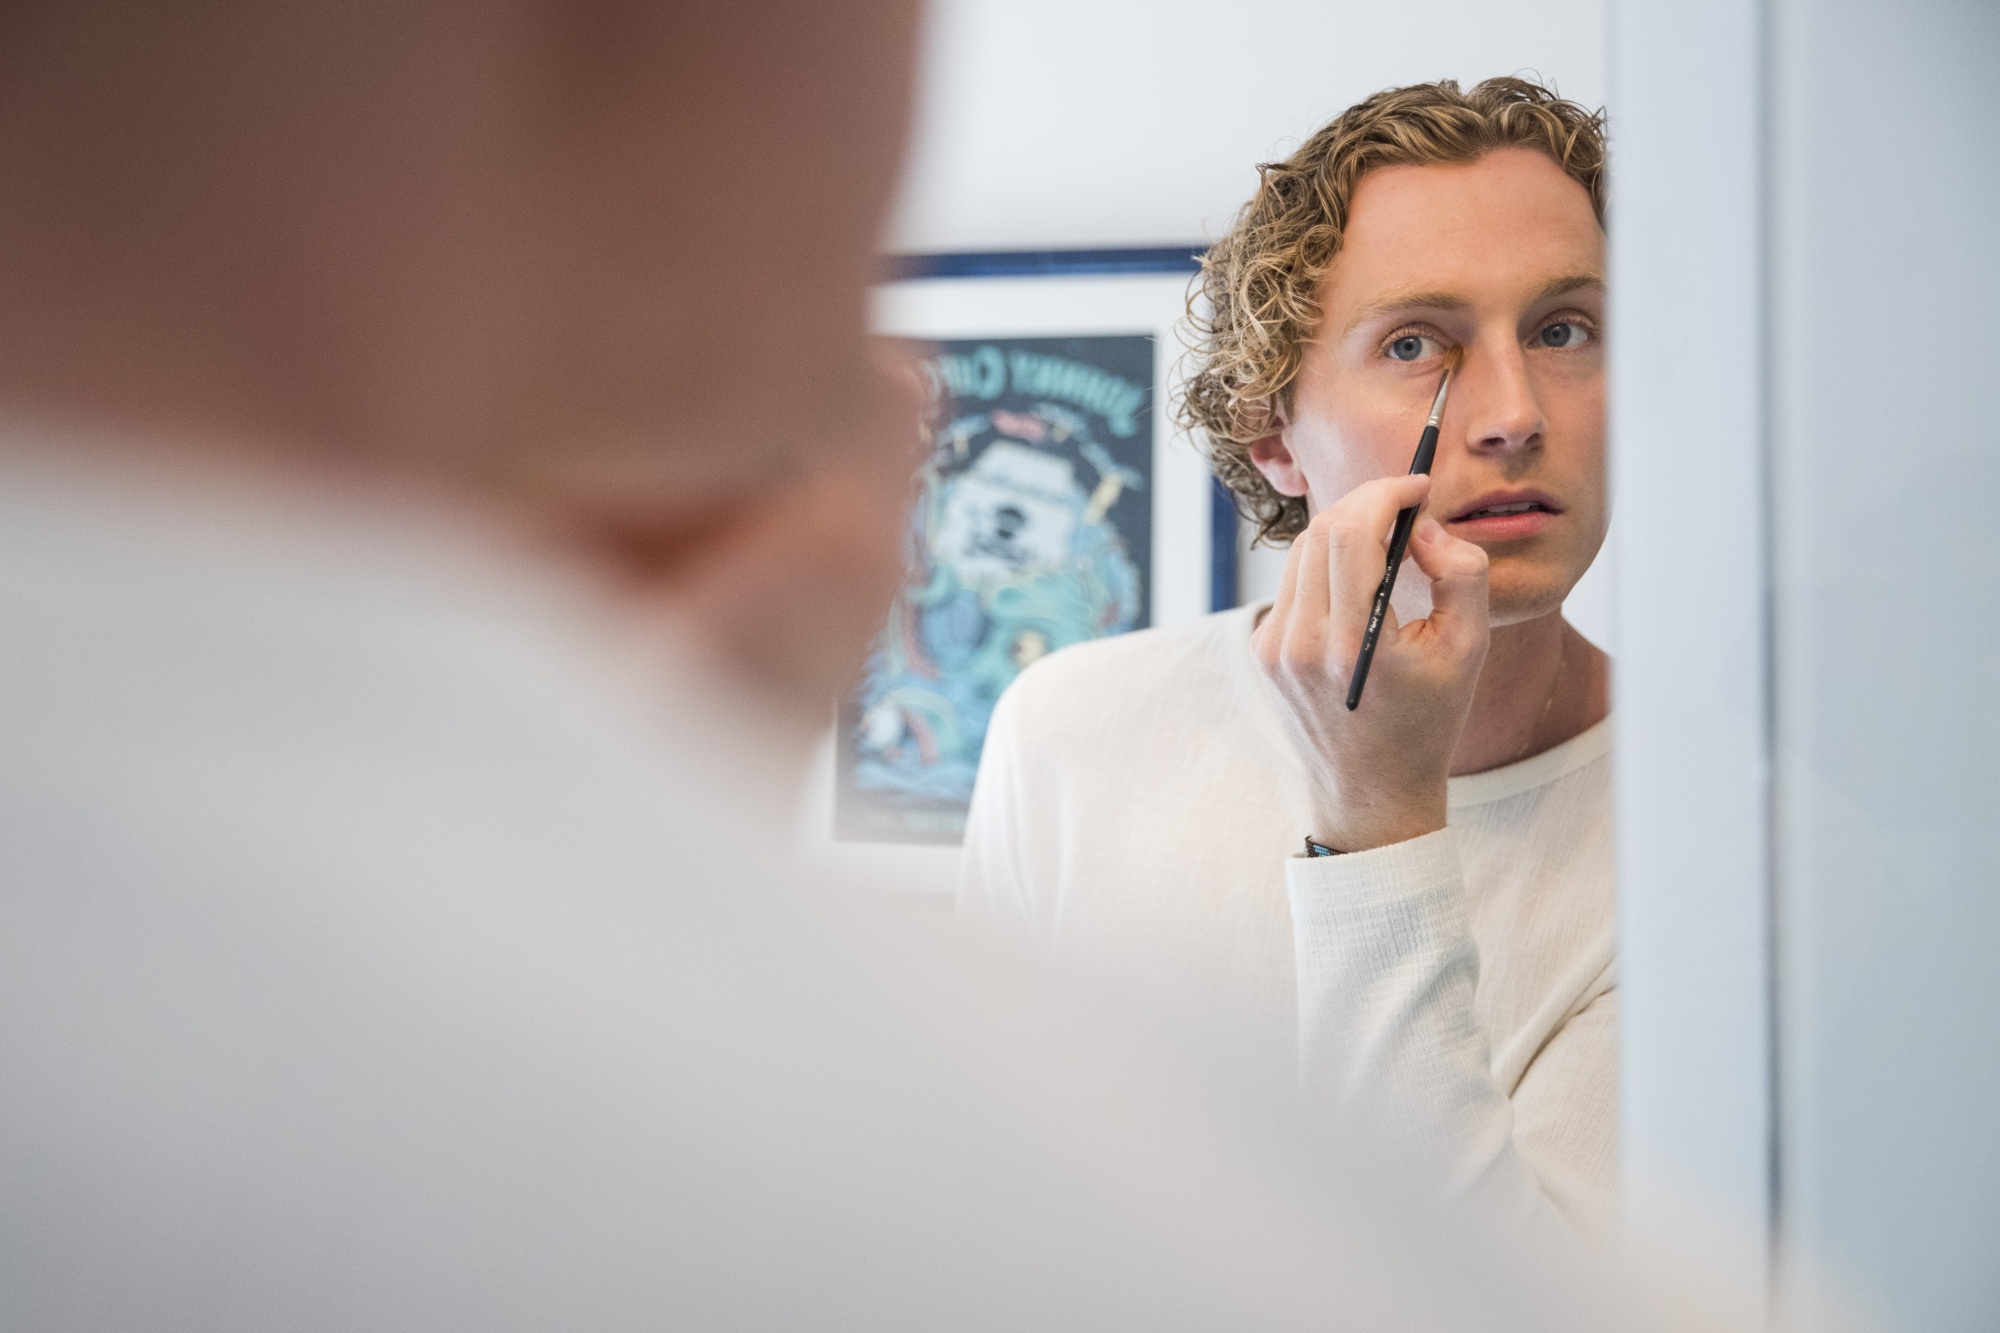 Axel Getz, 24, is part of a growing number of men interested in makeup. A recent poll showed about one third of men under 45 are willing to try cosmetics.